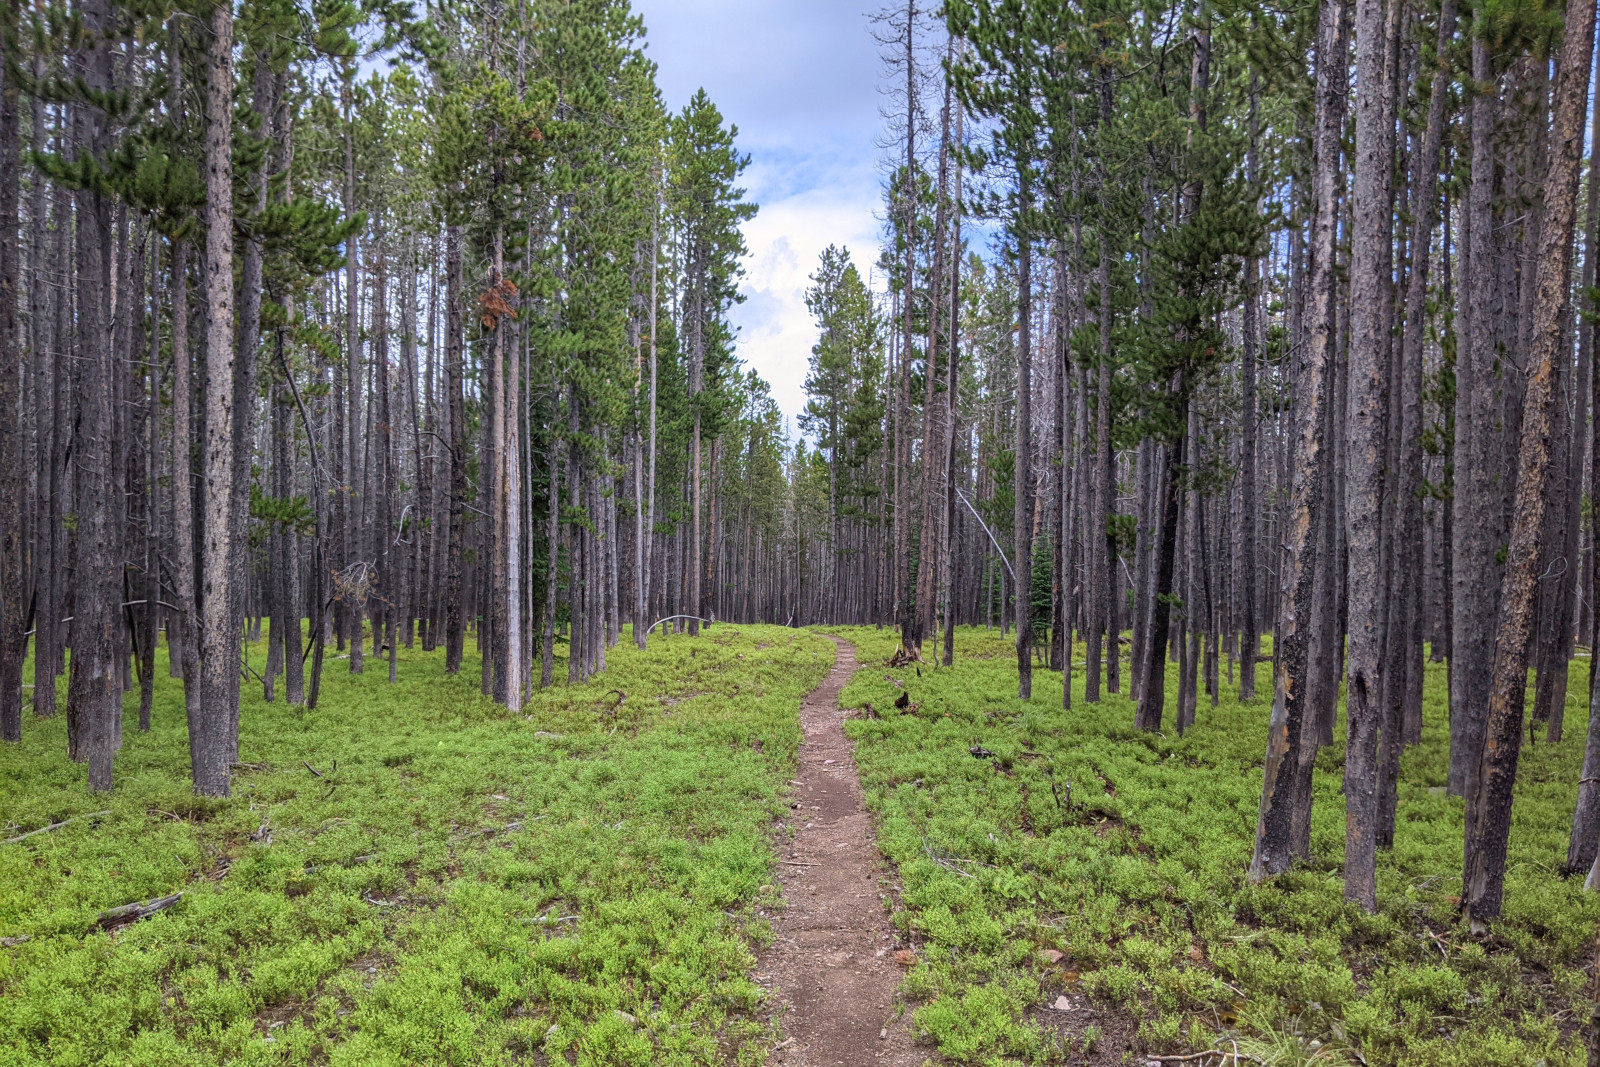 Lodgepole pine 'green tunnel' along the CDT